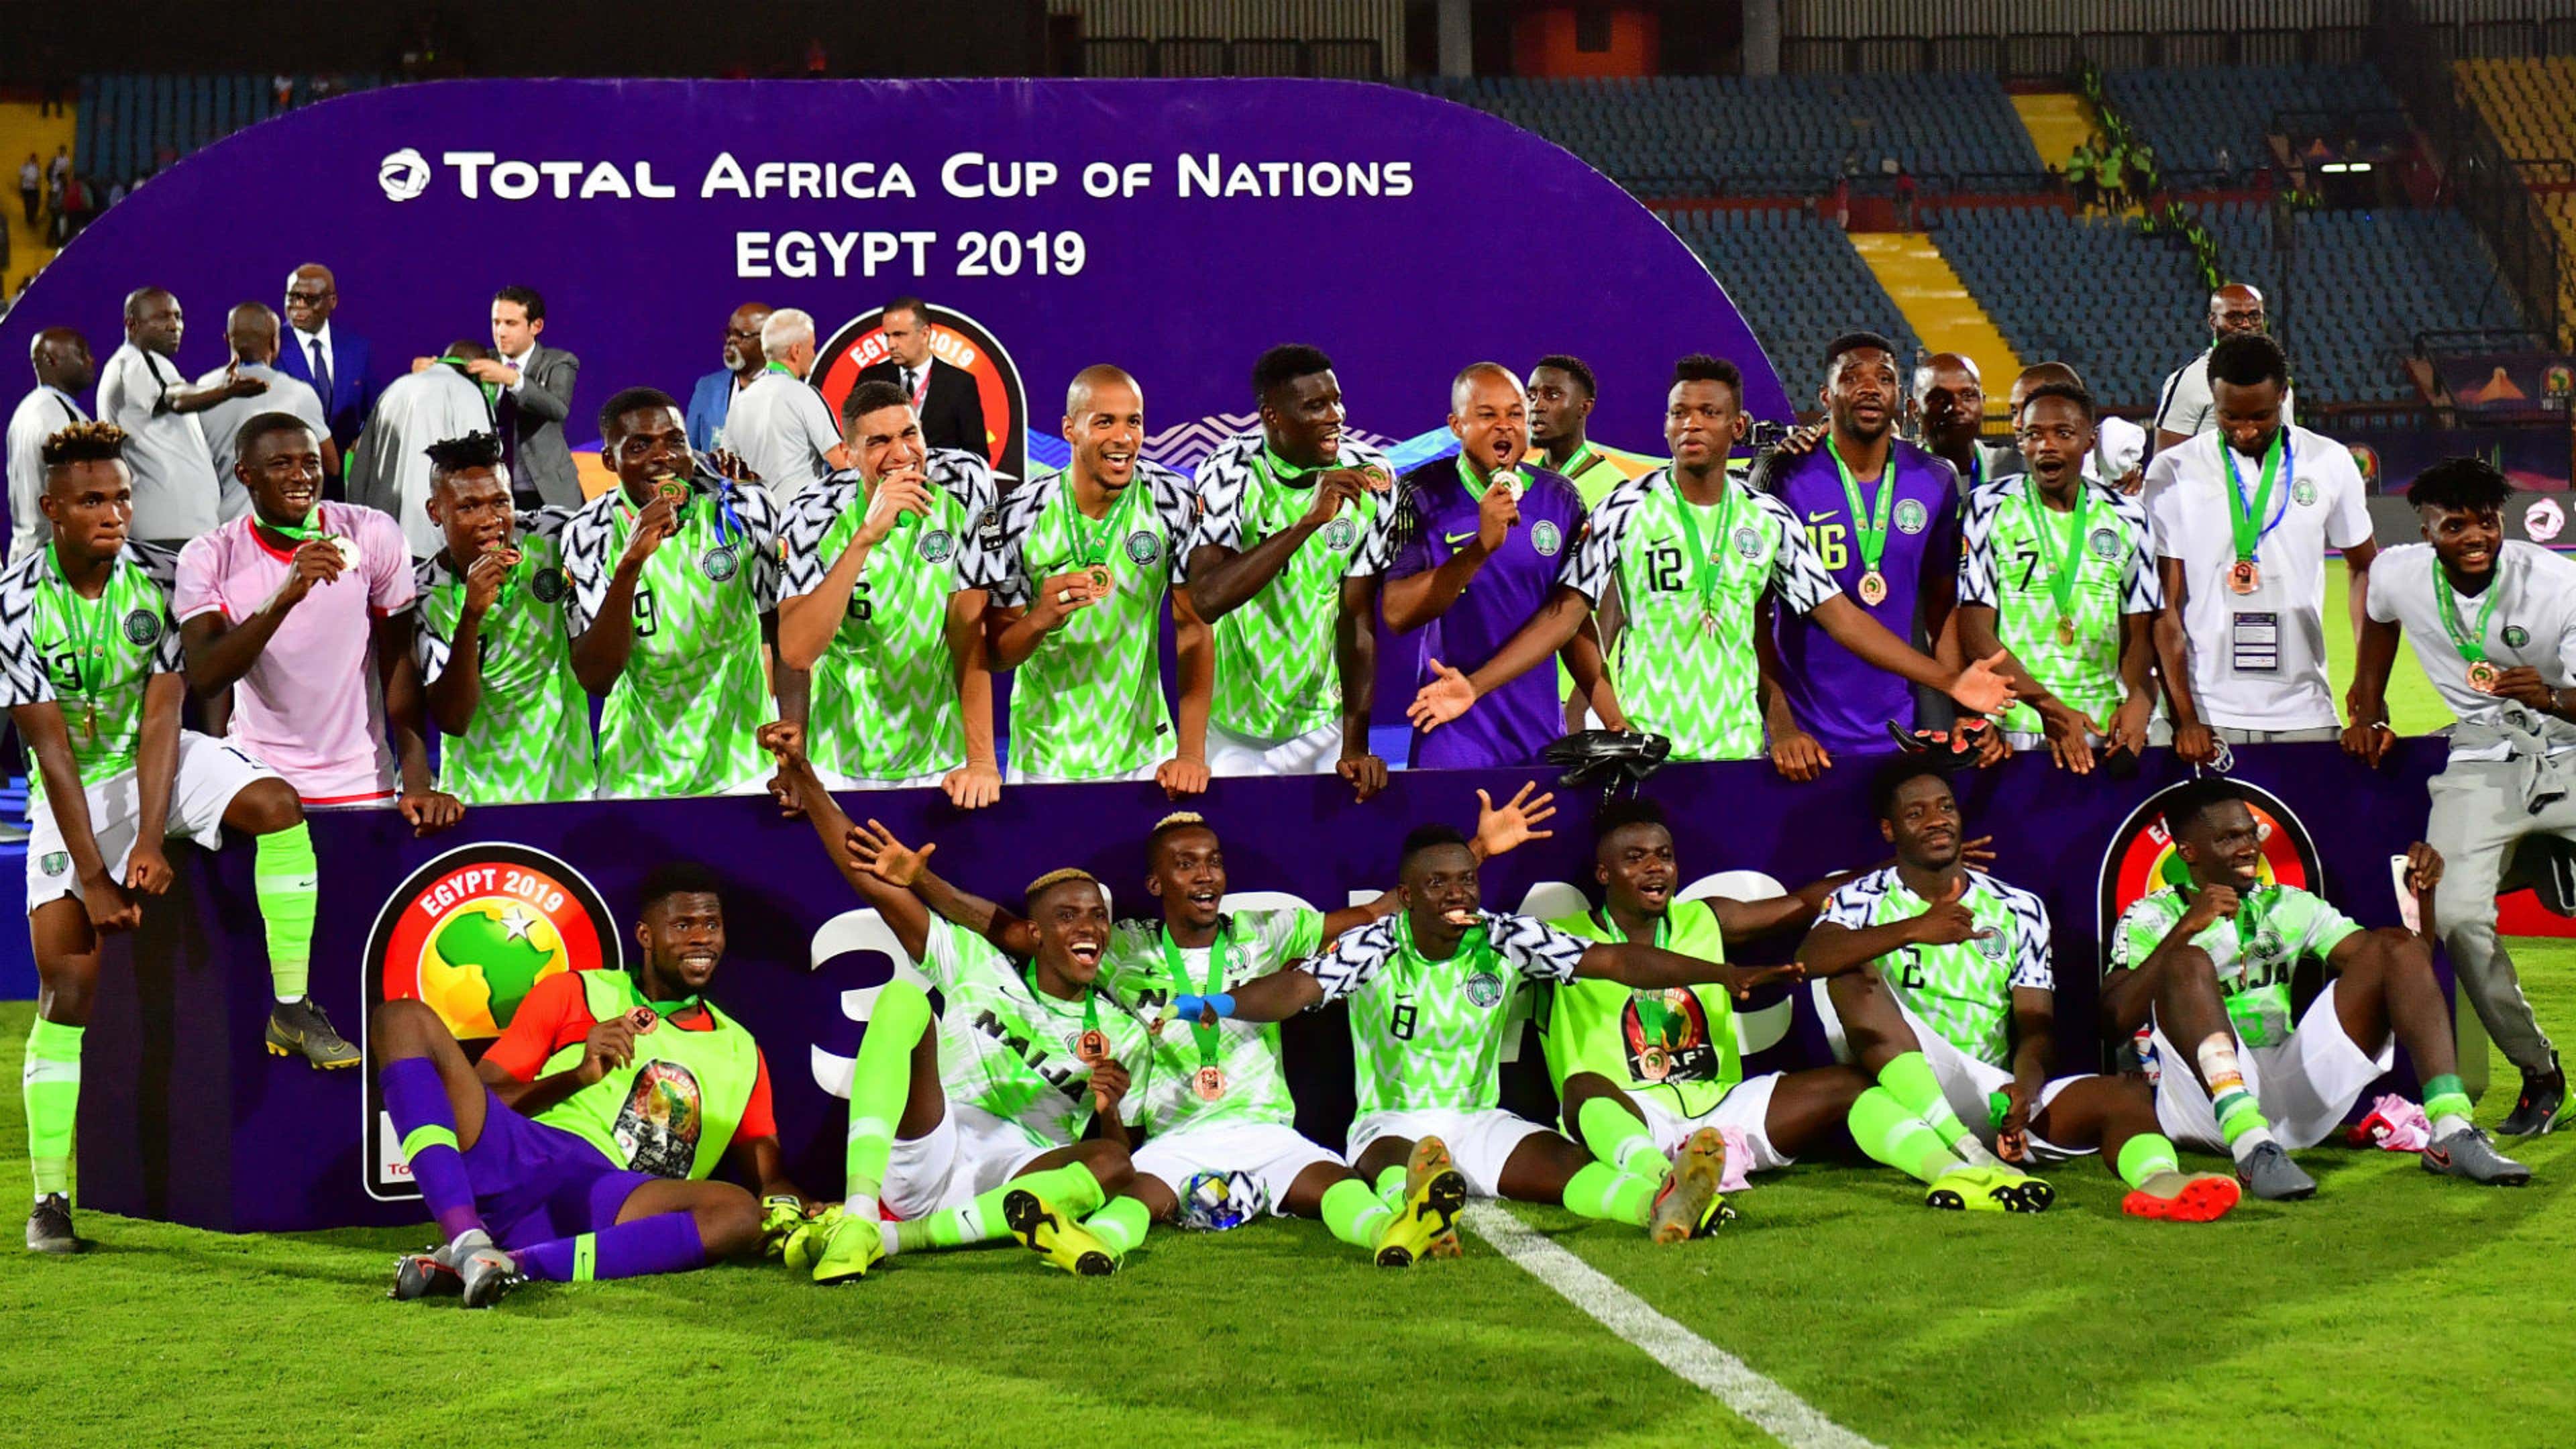 Nigeria players celebrate after winning the Acon 2019 Third place play-off